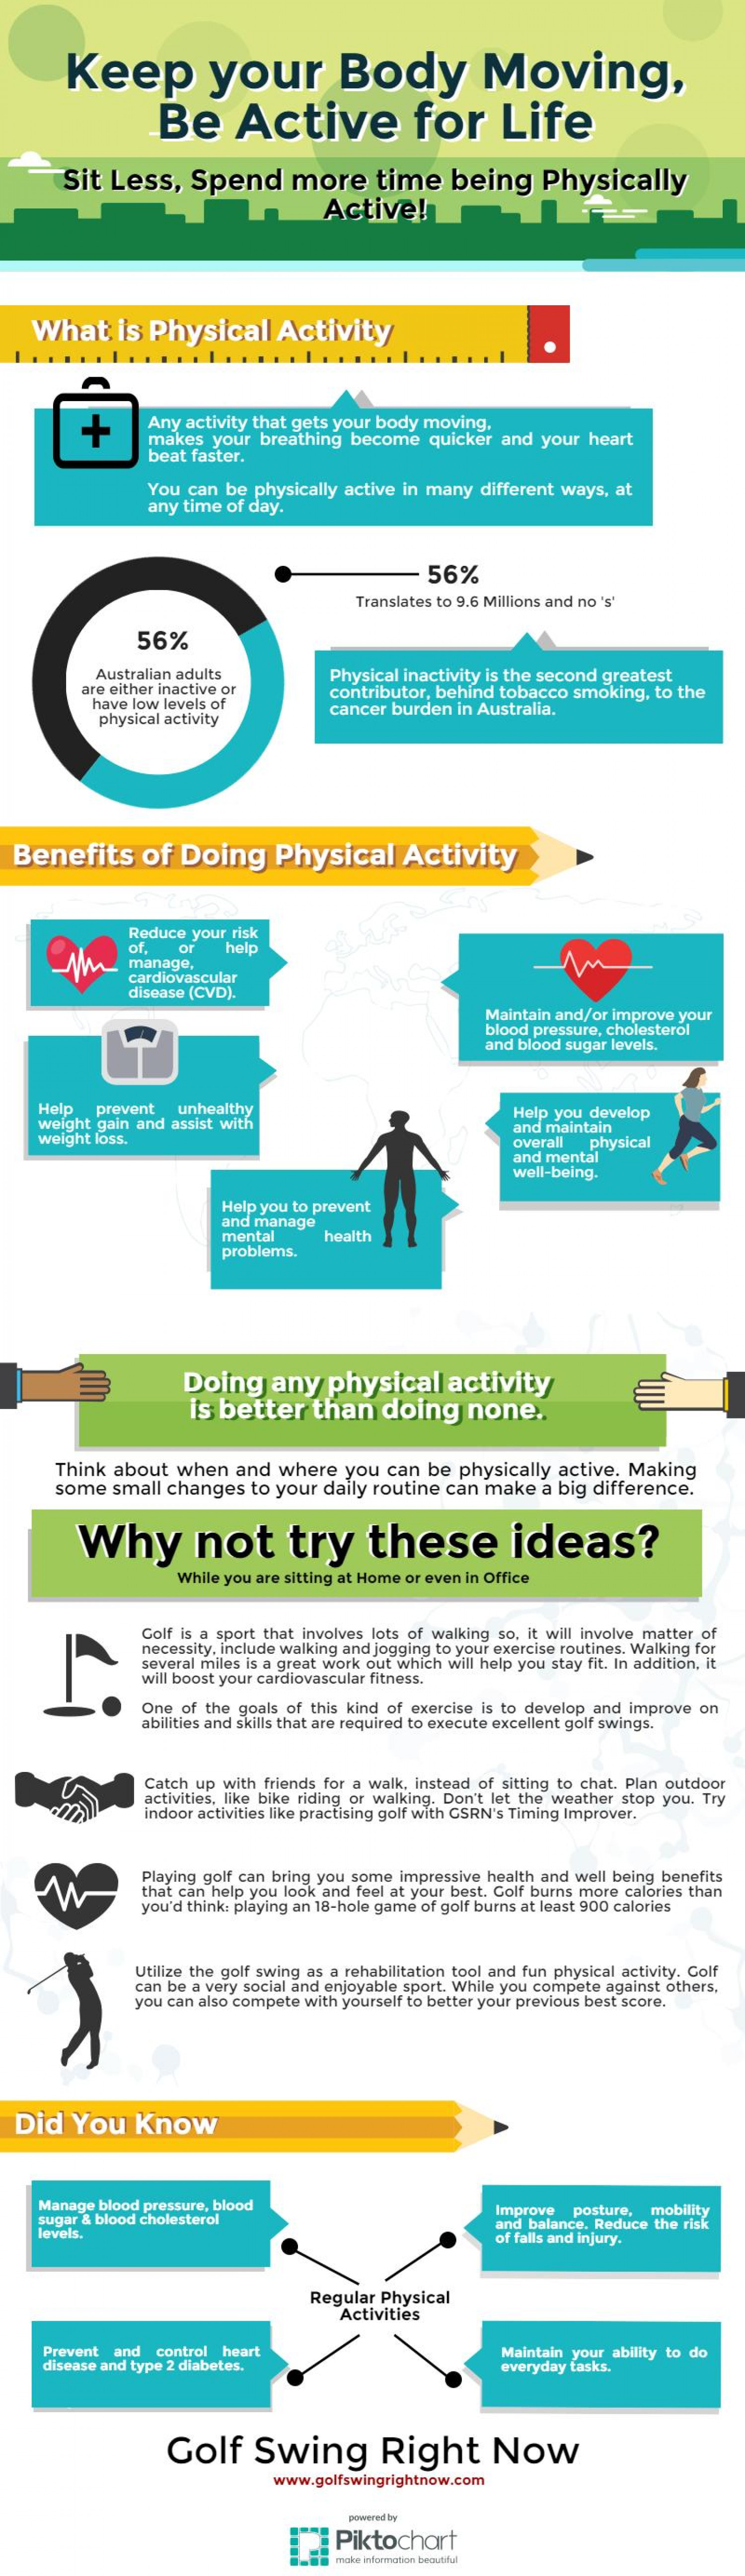 Keep your Body Moving, Be Active for Life Infographic